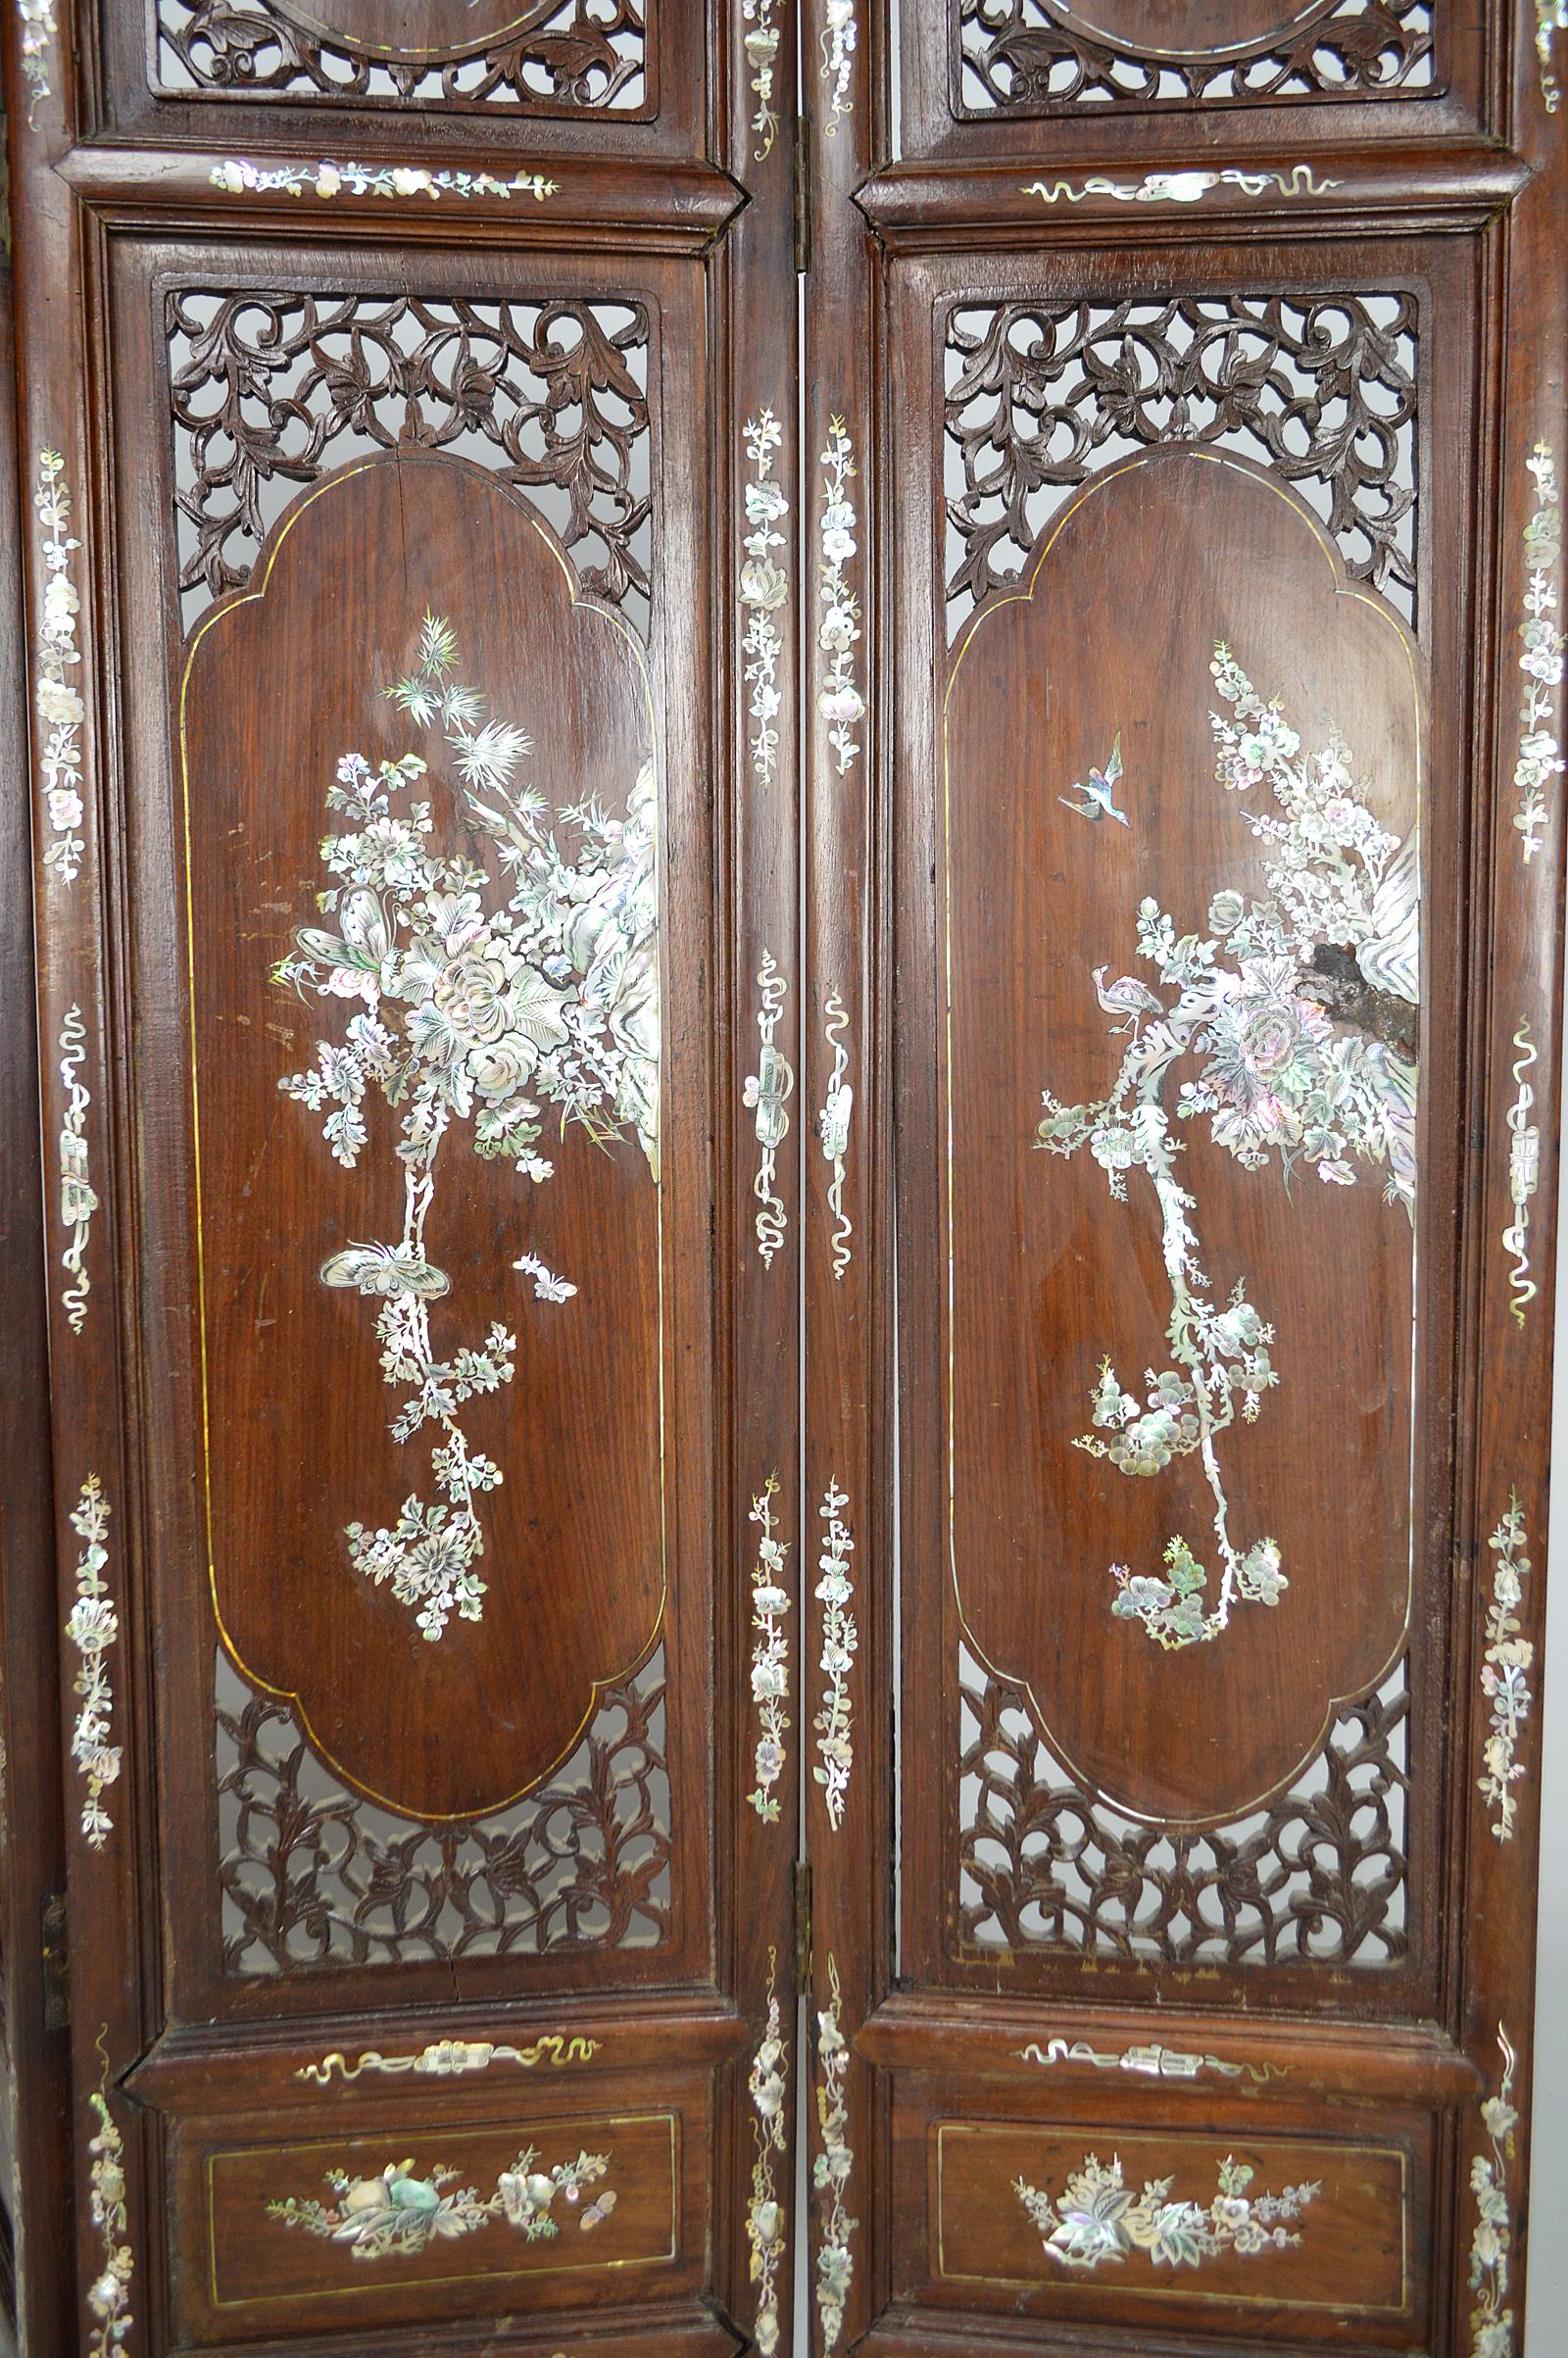 Late 19th Century Asian Folding Screen in Carved Wood and Mother-of-Pearl, 19th Century